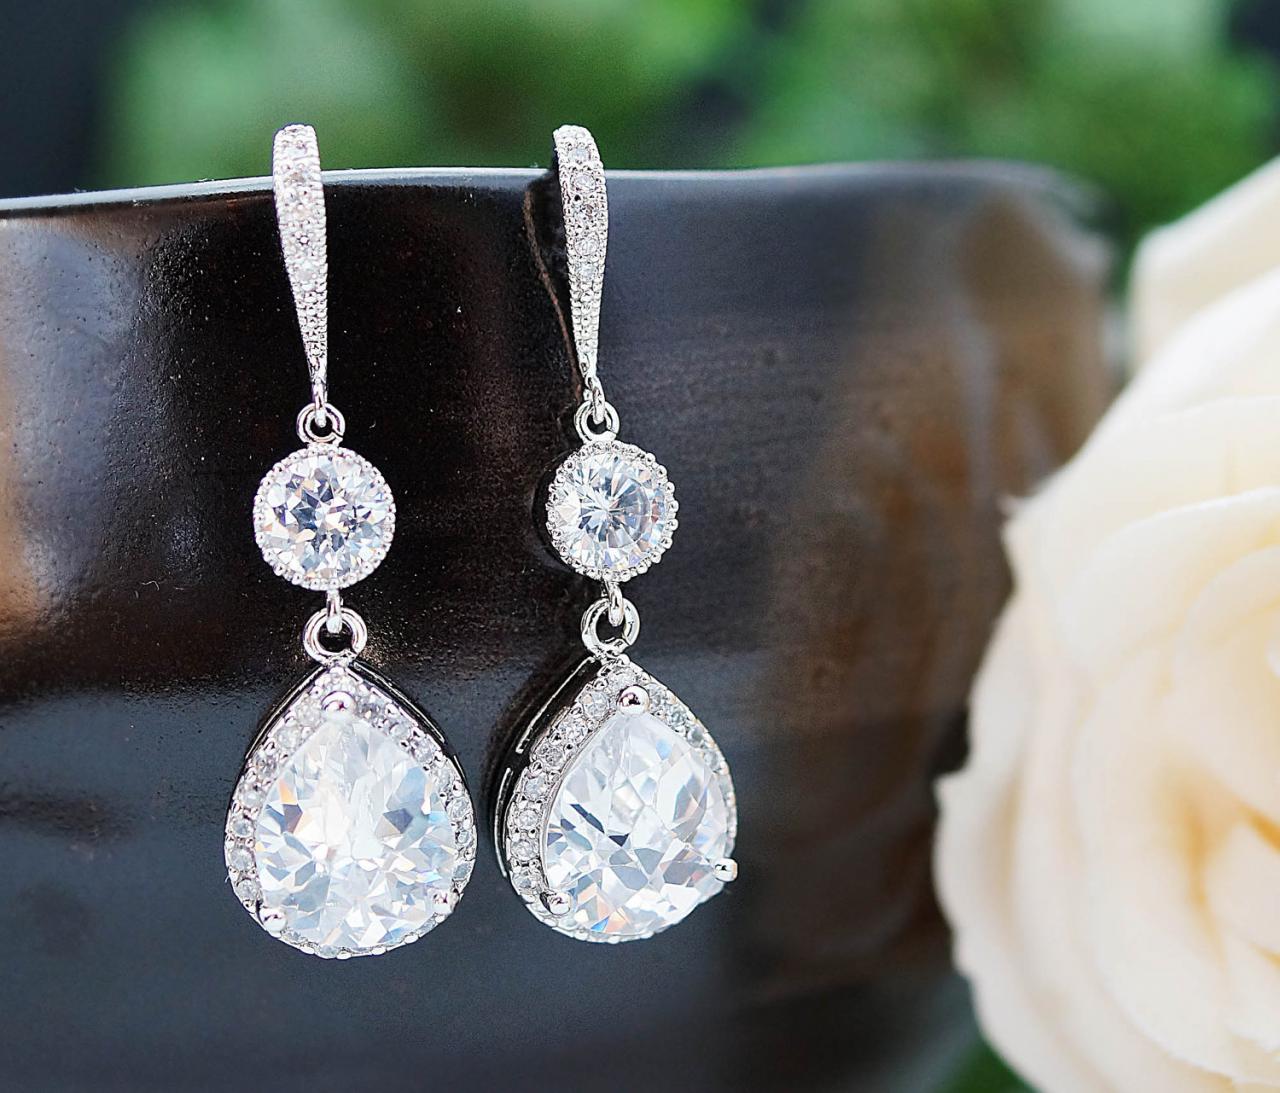 Wedding Jewelry Bridal Jewelry Bridal Earrings Cubic Zirconia Connectors And Clear White (lux) Cubic Zirconia Crystal Tear Drops